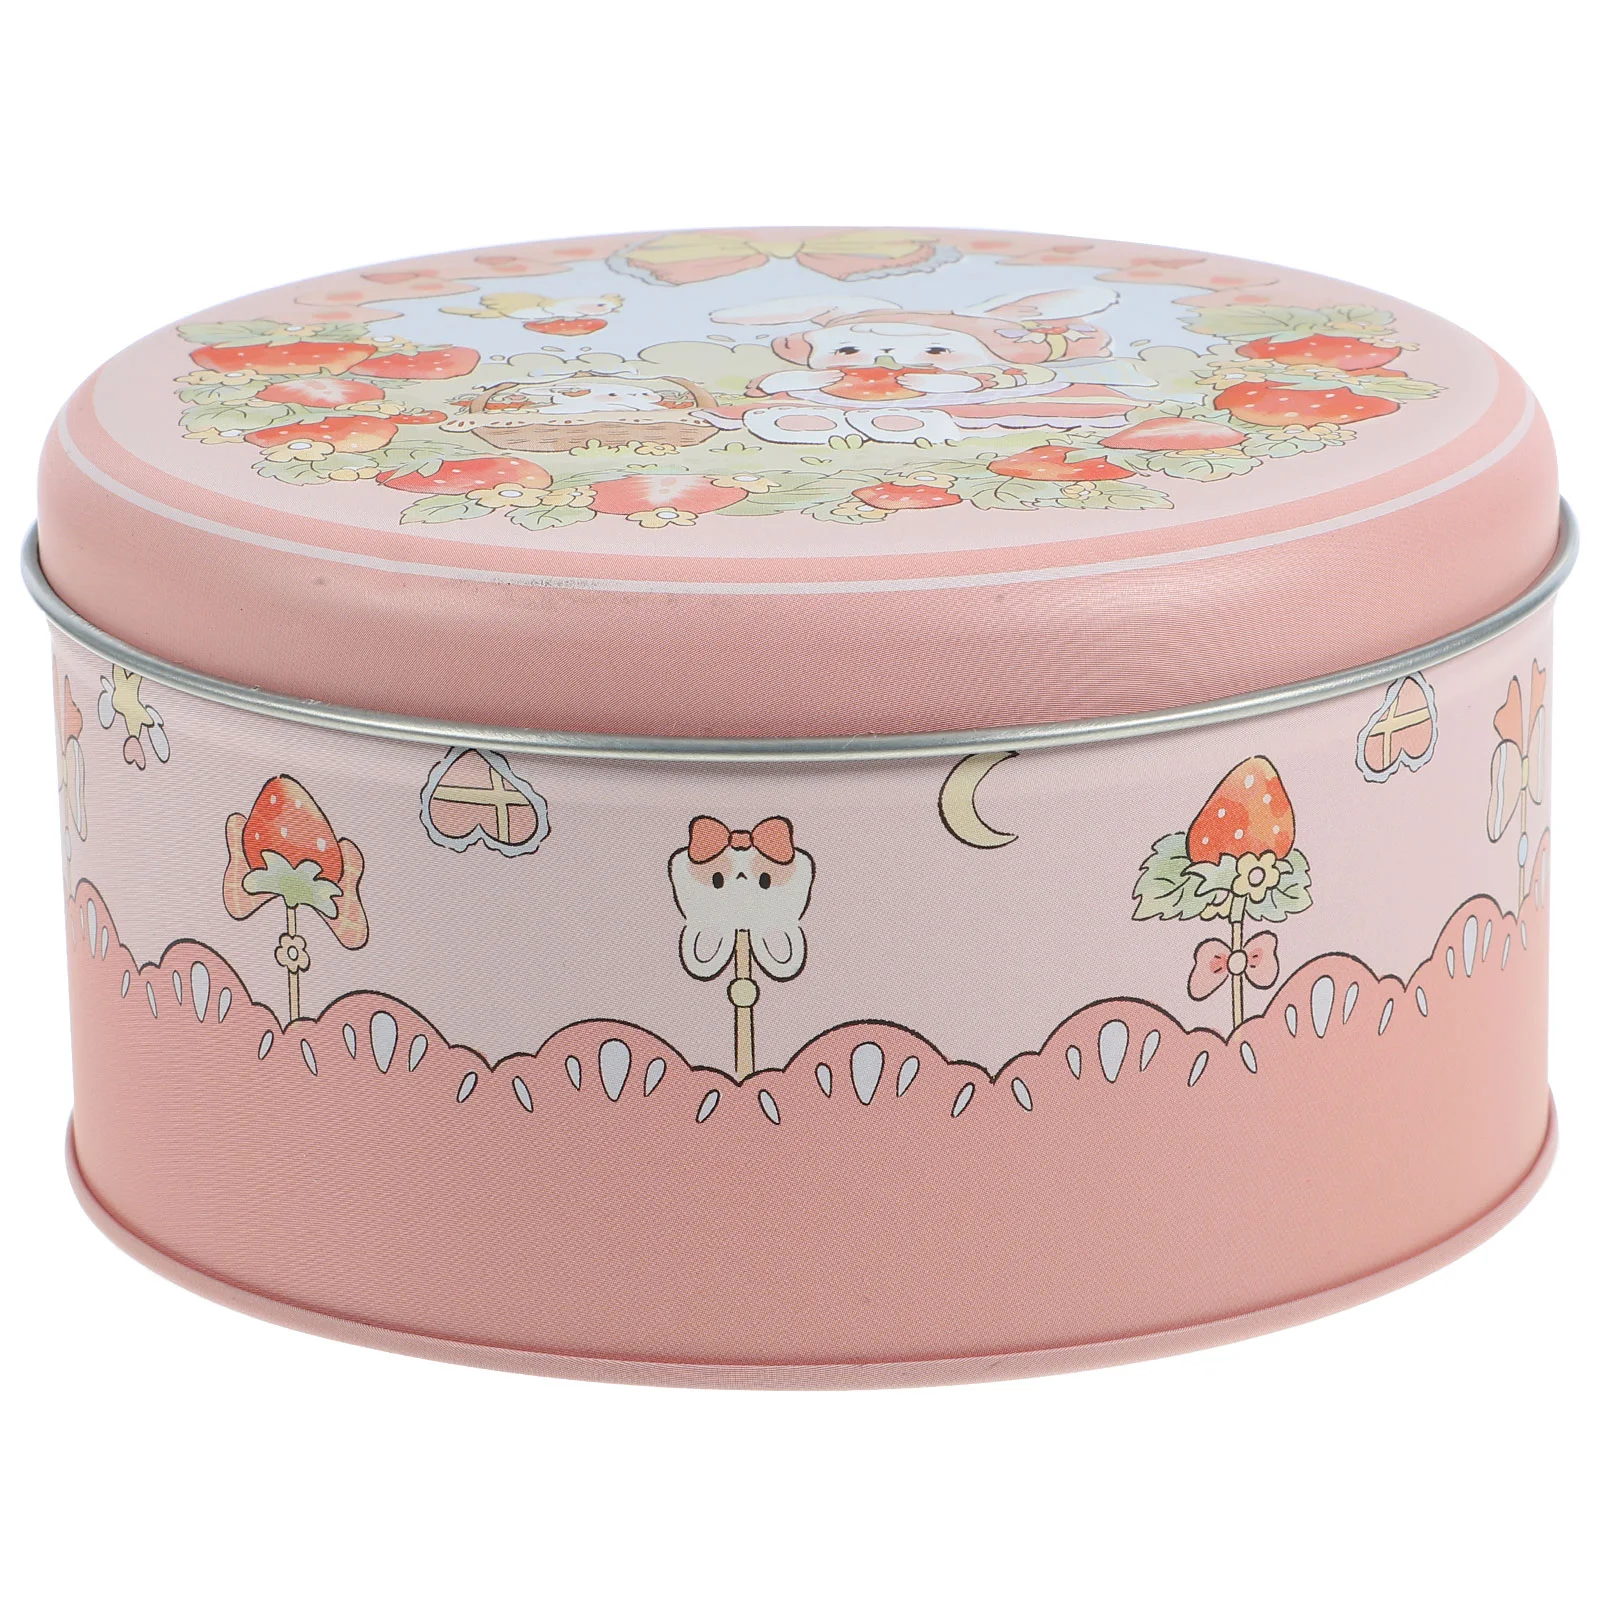 

Cookie Jar Easter Gift Round Baking Cake Gift Tins Rabbit Bunny Strawberry Pattern Tinplate Empty Tins Box Candies Boxes